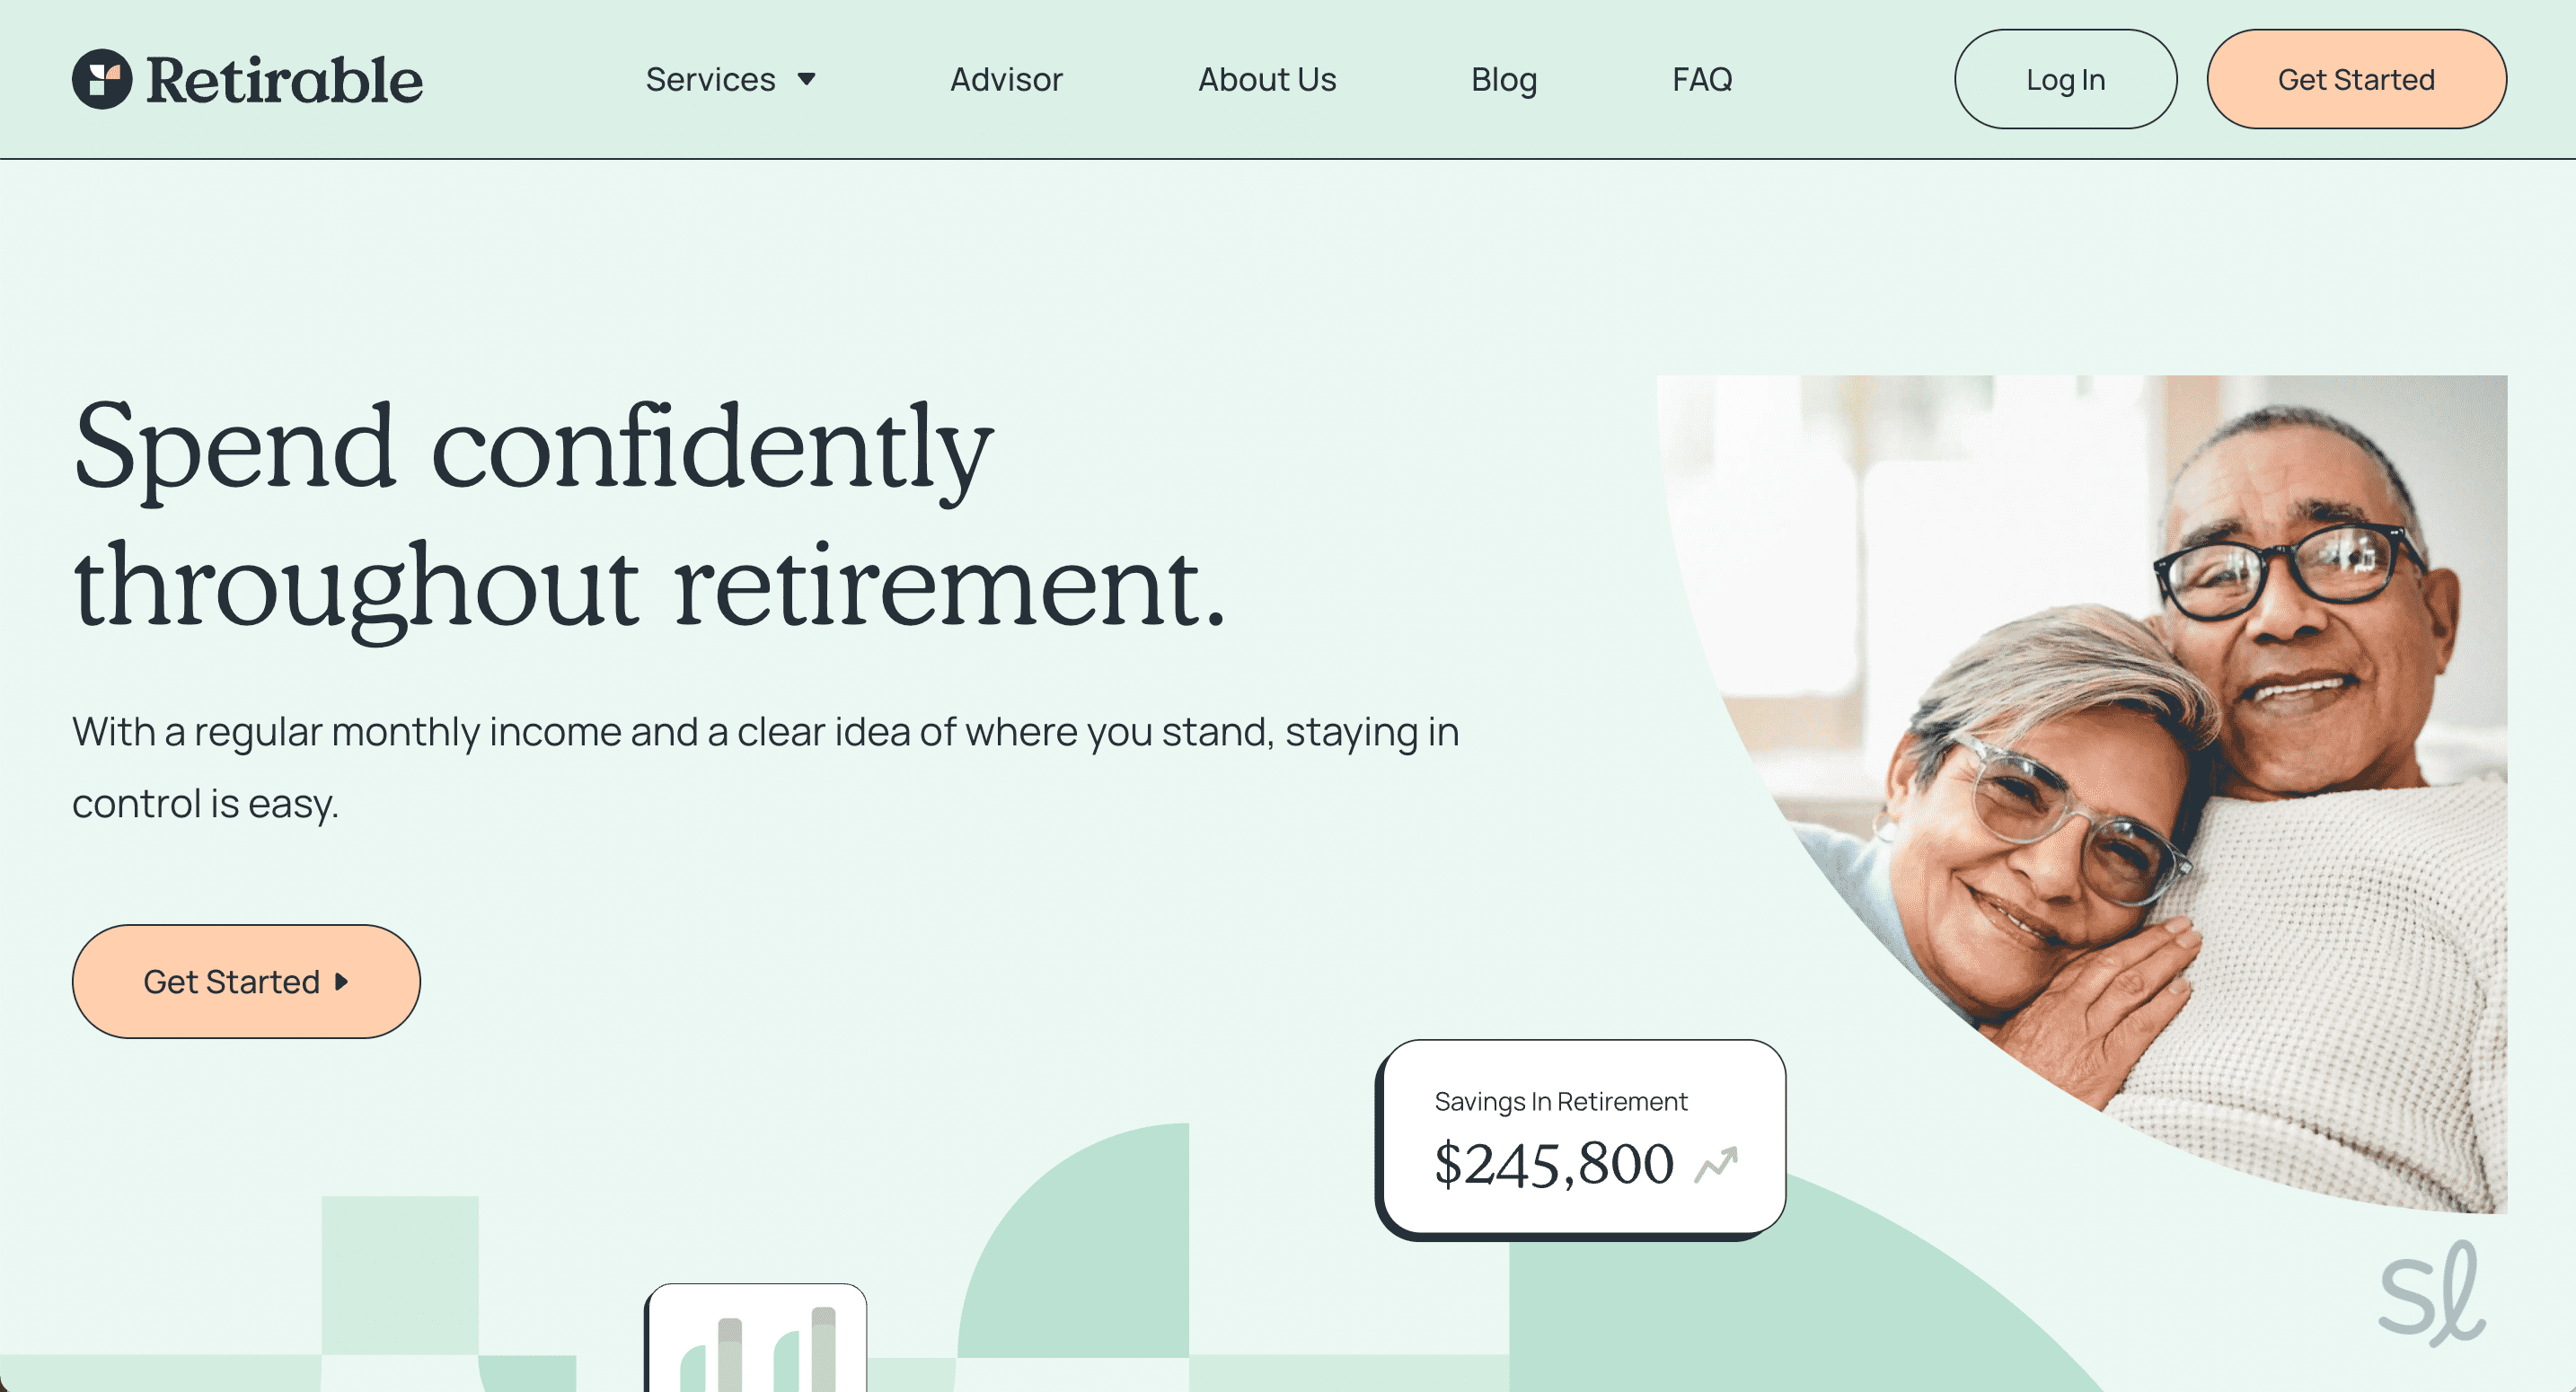 Select "Get Started" on Retirable's home page